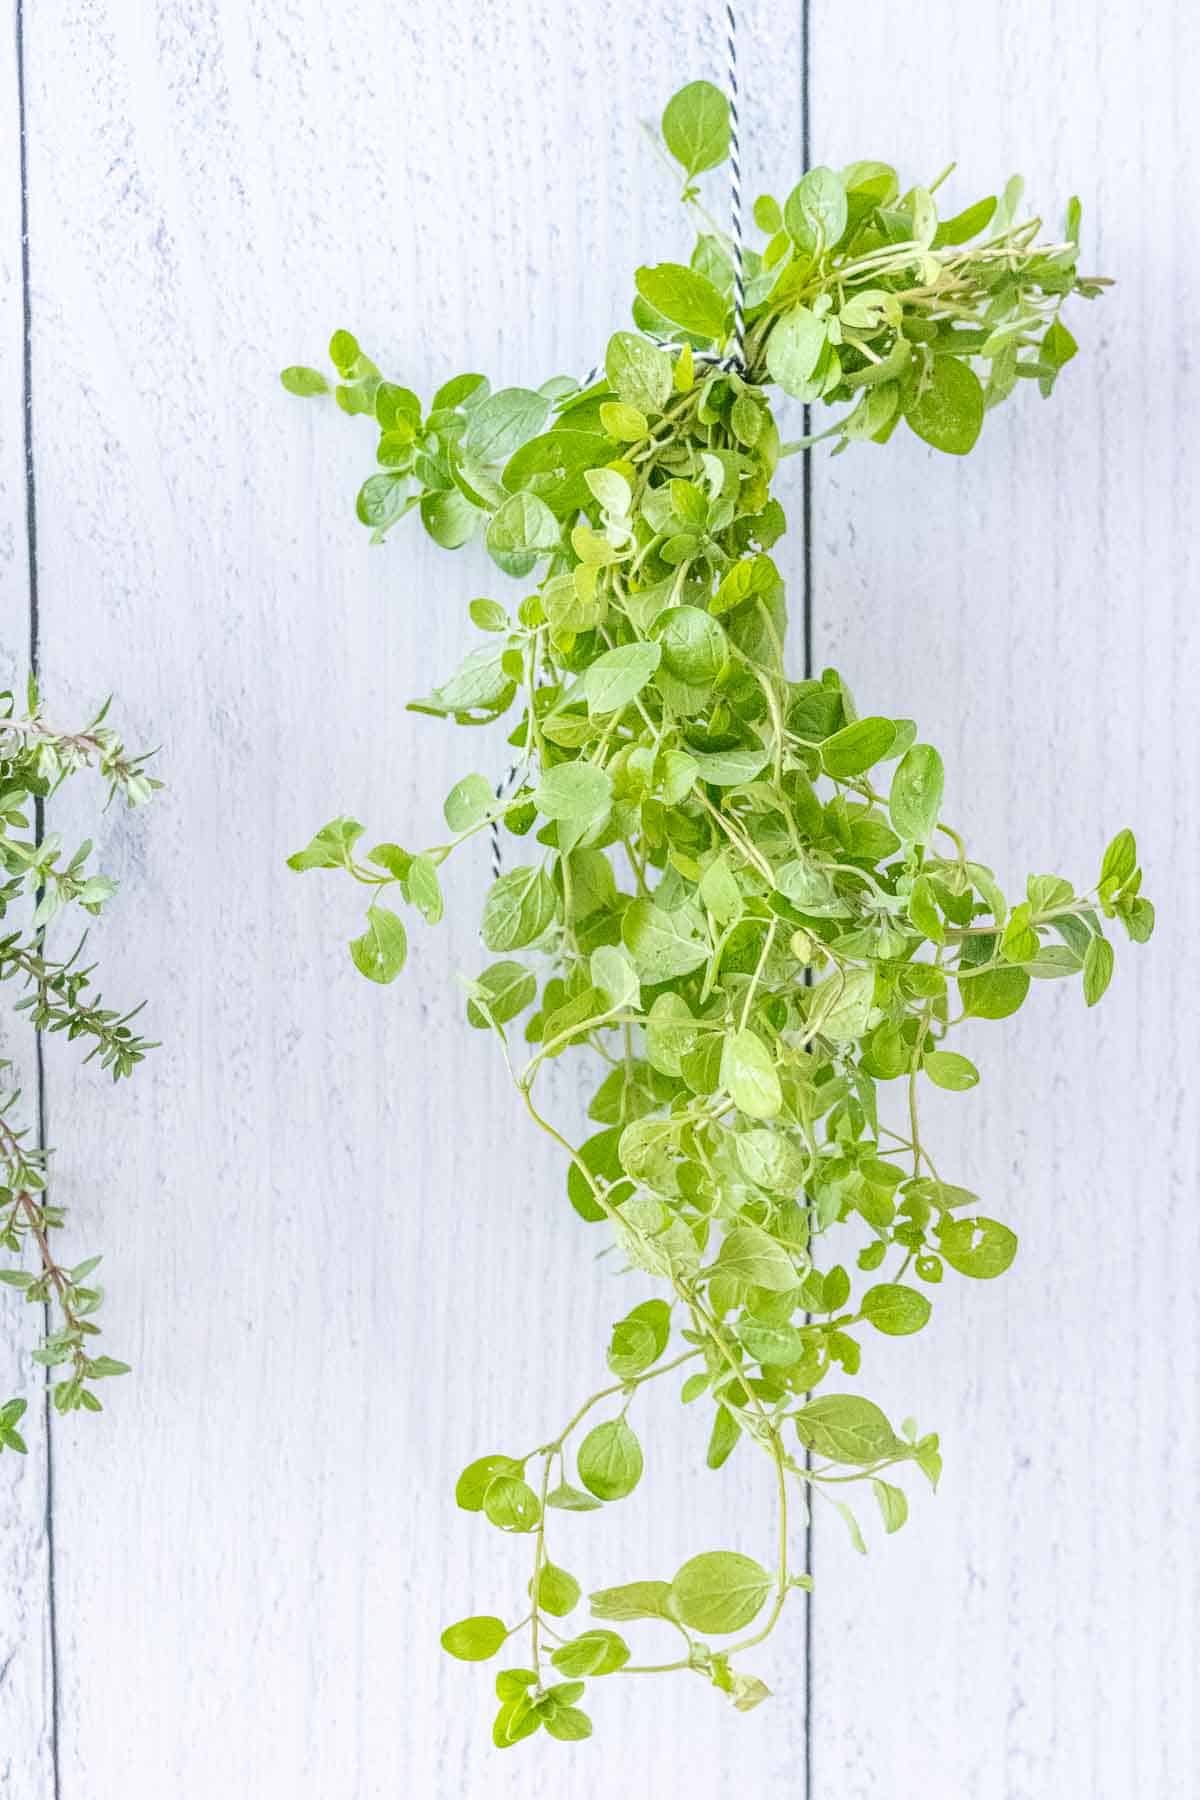 Fresh oregano hanging from a string for drying.